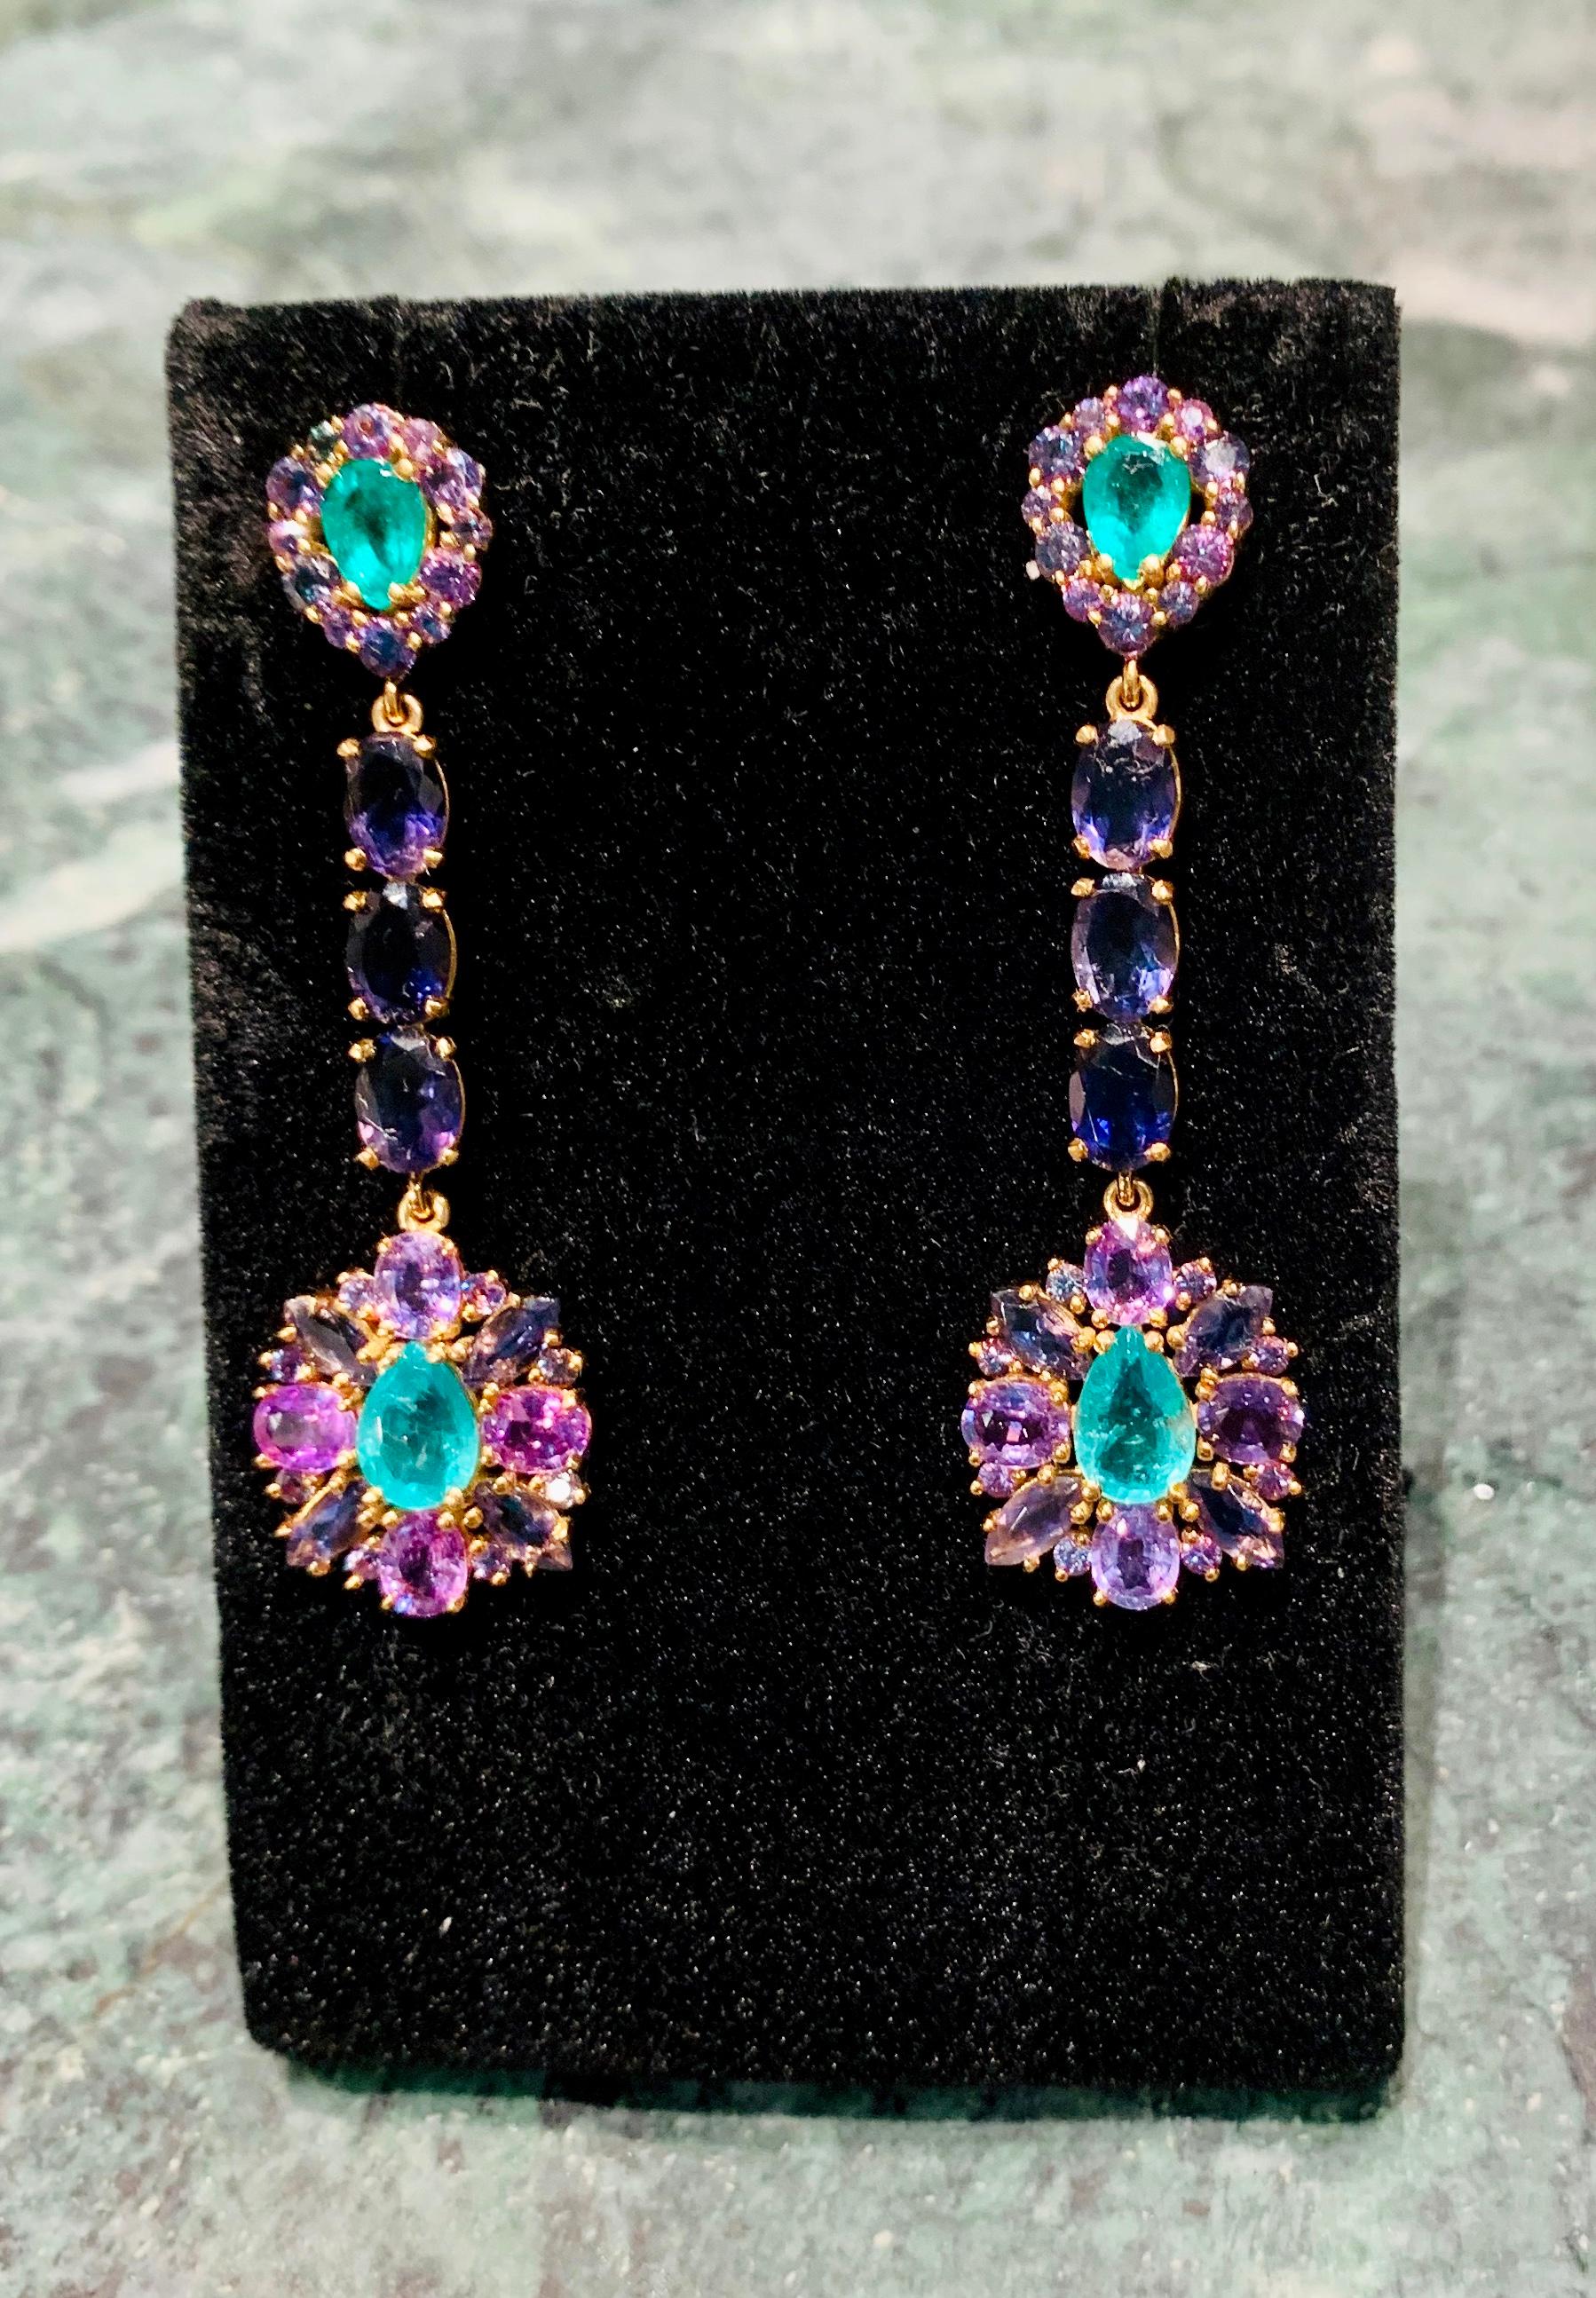 Zambian Emerald and Alexandrite Earrings 3.92 Carats of Emeralds For Sale 4